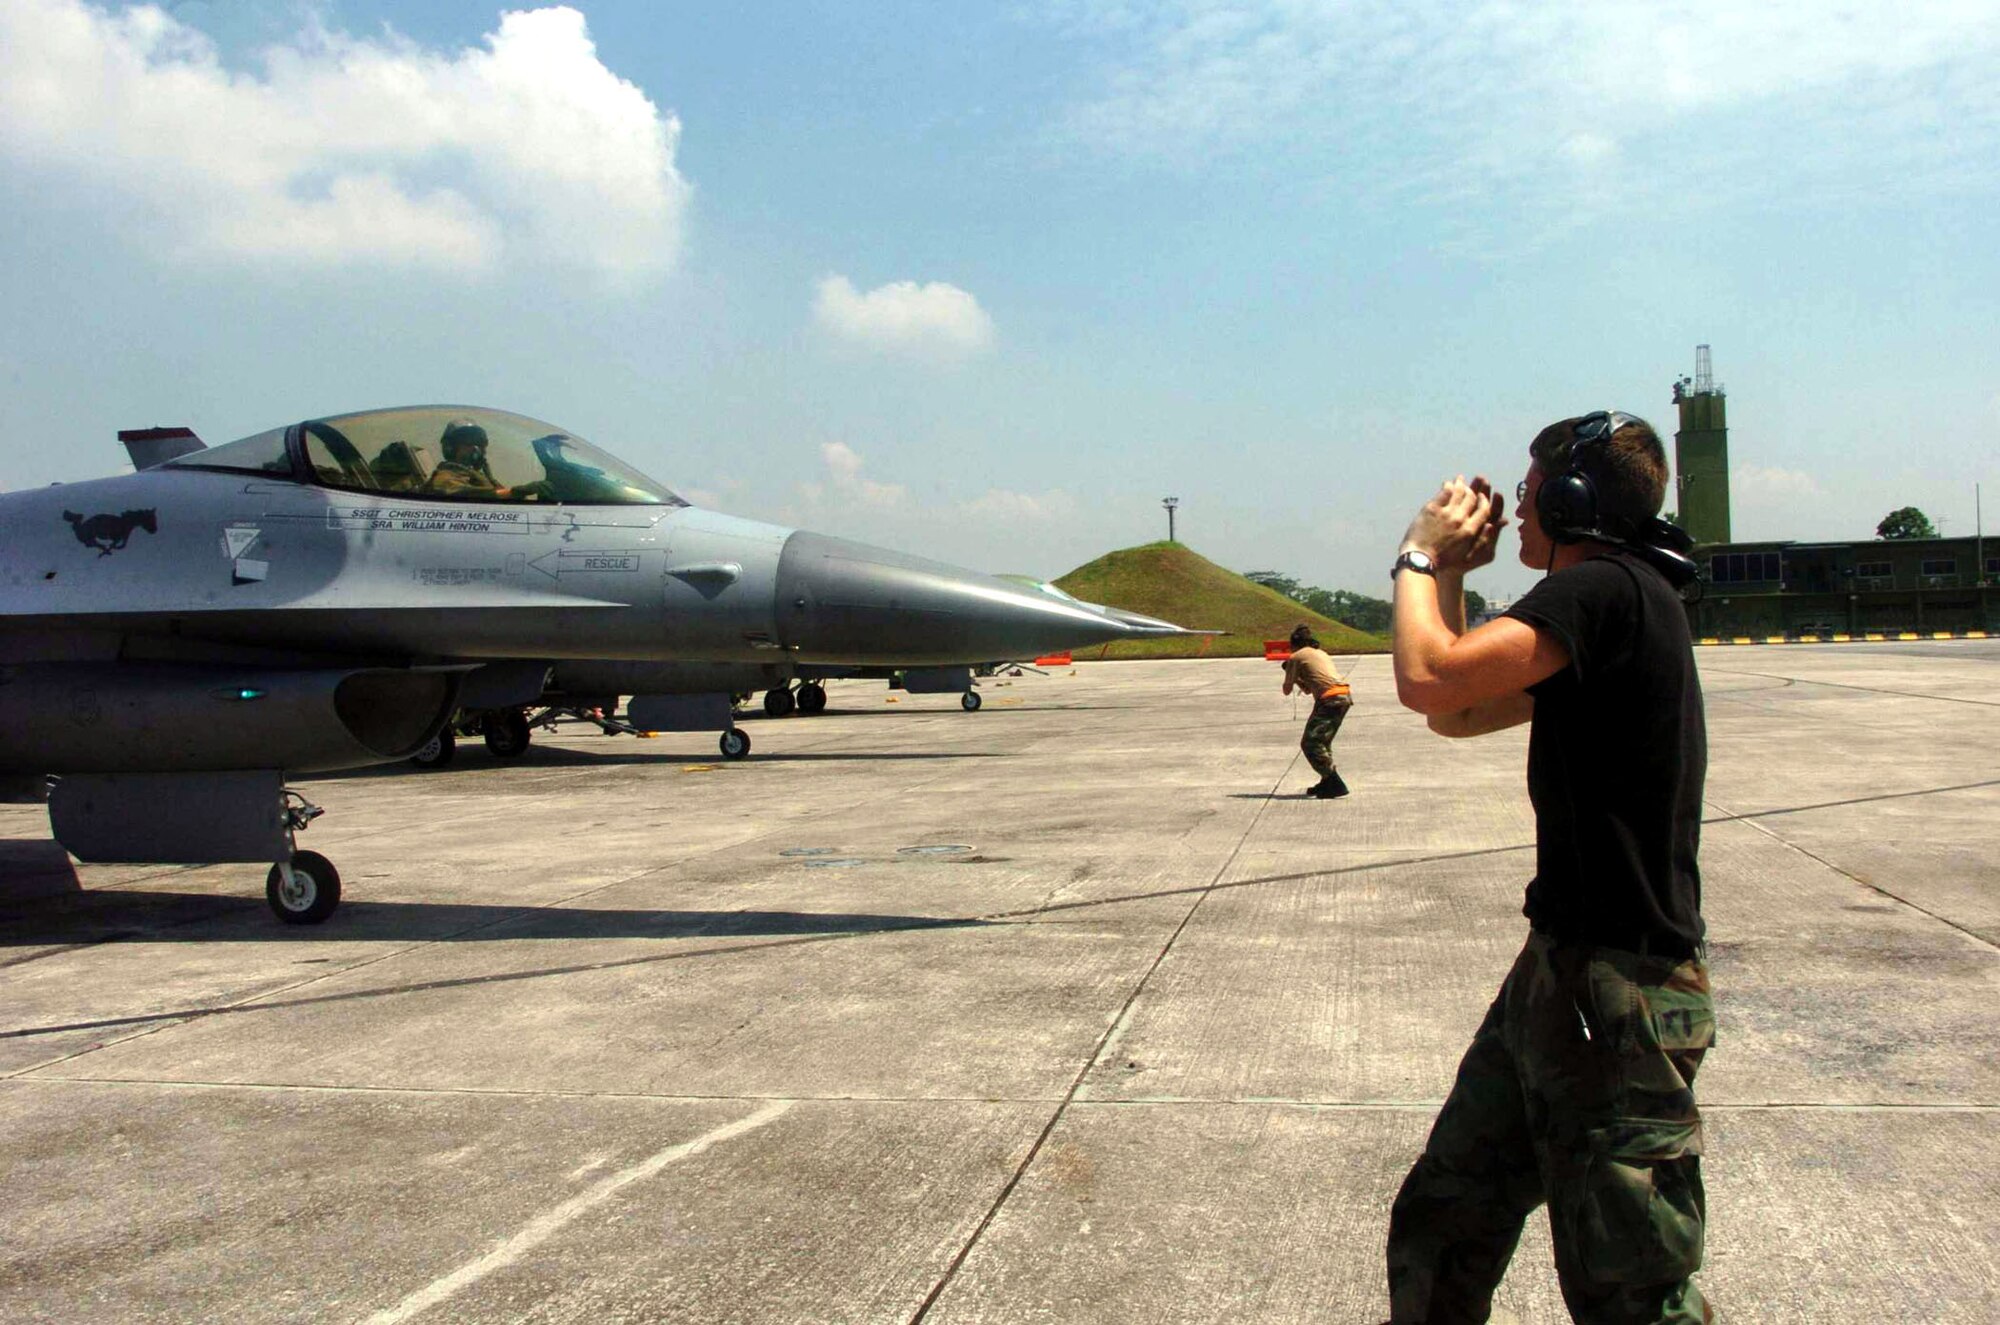 PAYA LABAR AIR BASE, Singapore -- Senior Airman Derek Griggs (foreground) and Staff Sgt. Jed Lawhun launch F-16 Fighting Falcons during Commando Sling 04-3 here.  U.S. and Singaporean Airmen trained together using realistic dissimilar aircraft air-to-air combat tactics.  Both Airmen are crew chiefs with the 36th Maintenance Squadron at Osan Air Base, South Korea.  (U.S. Air Force photo by Master Sgt. Val Gempis)